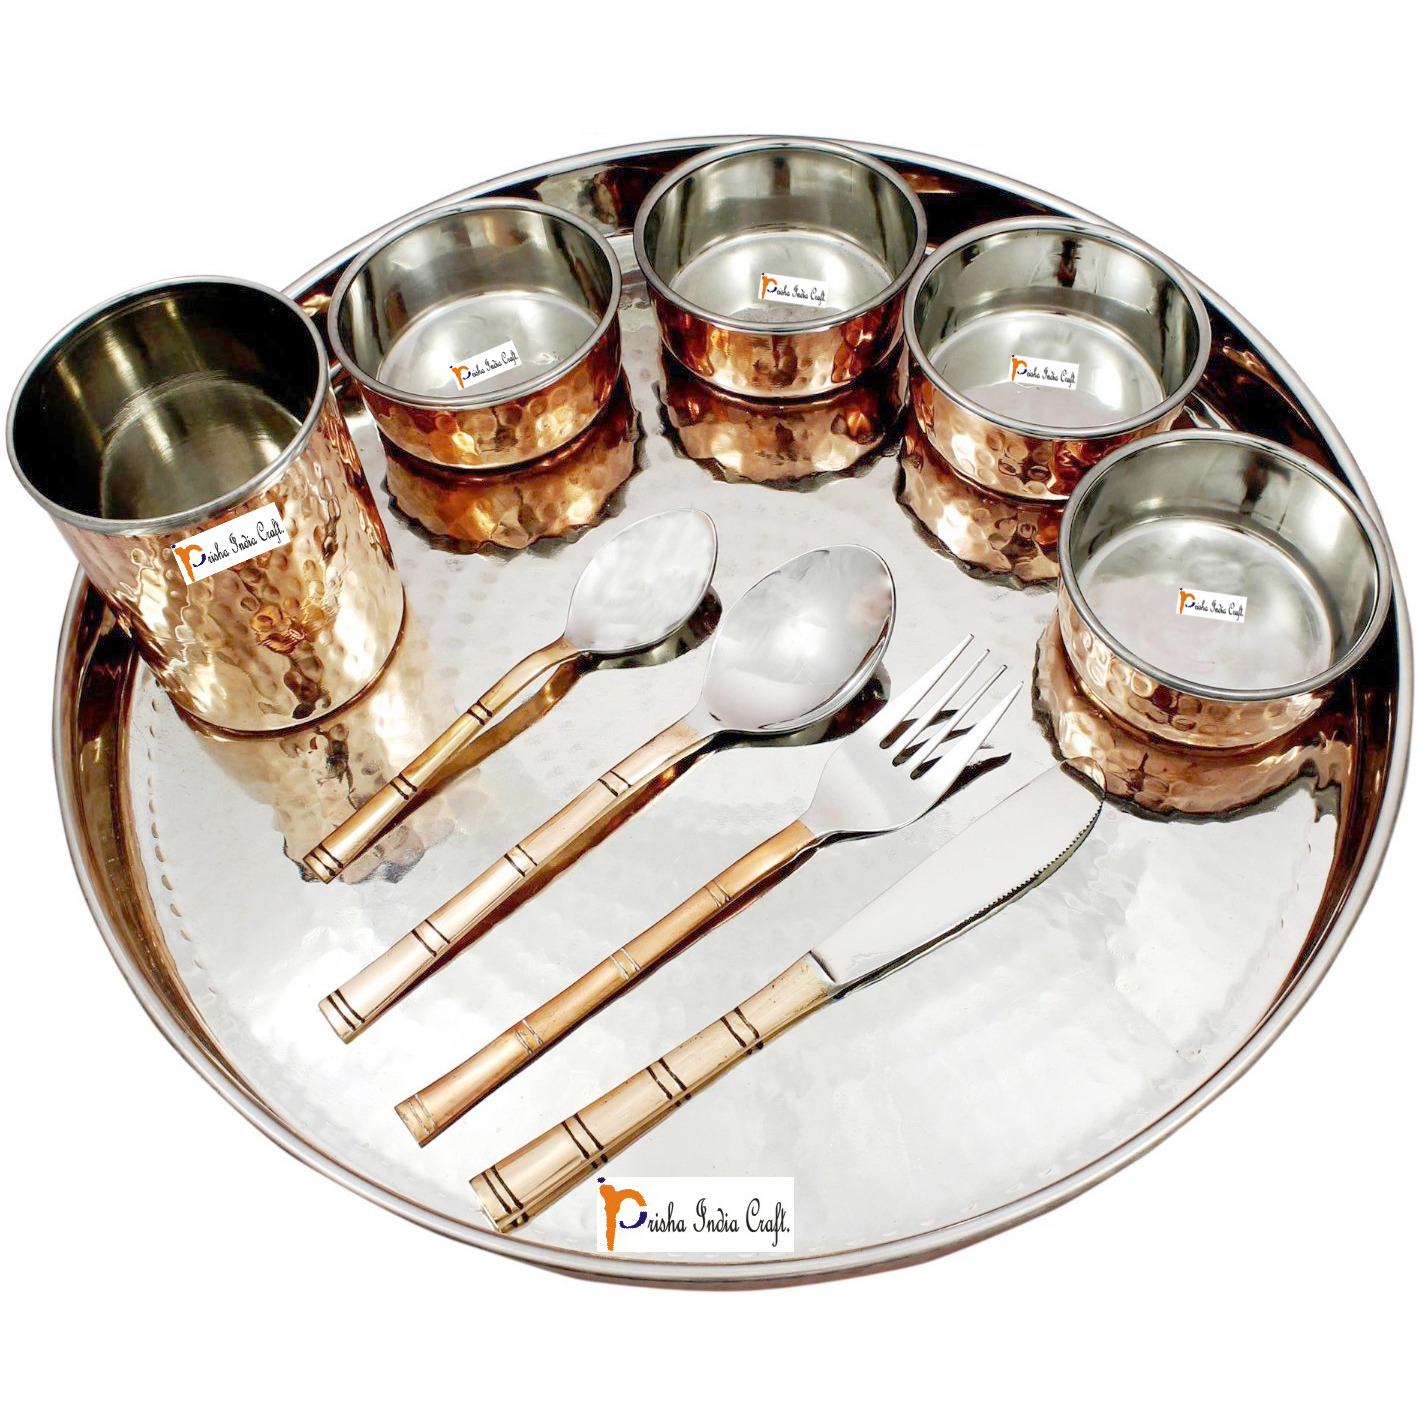 Prisha India Craft B. Set of 4 Dinnerware Traditional Stainless Steel Copper Dinner Set of Thali Plate, Bowls, Glass and Spoons, Dia 13  With 1 Pure Copper Maharaja Pitcher Jug - Christmas Gift